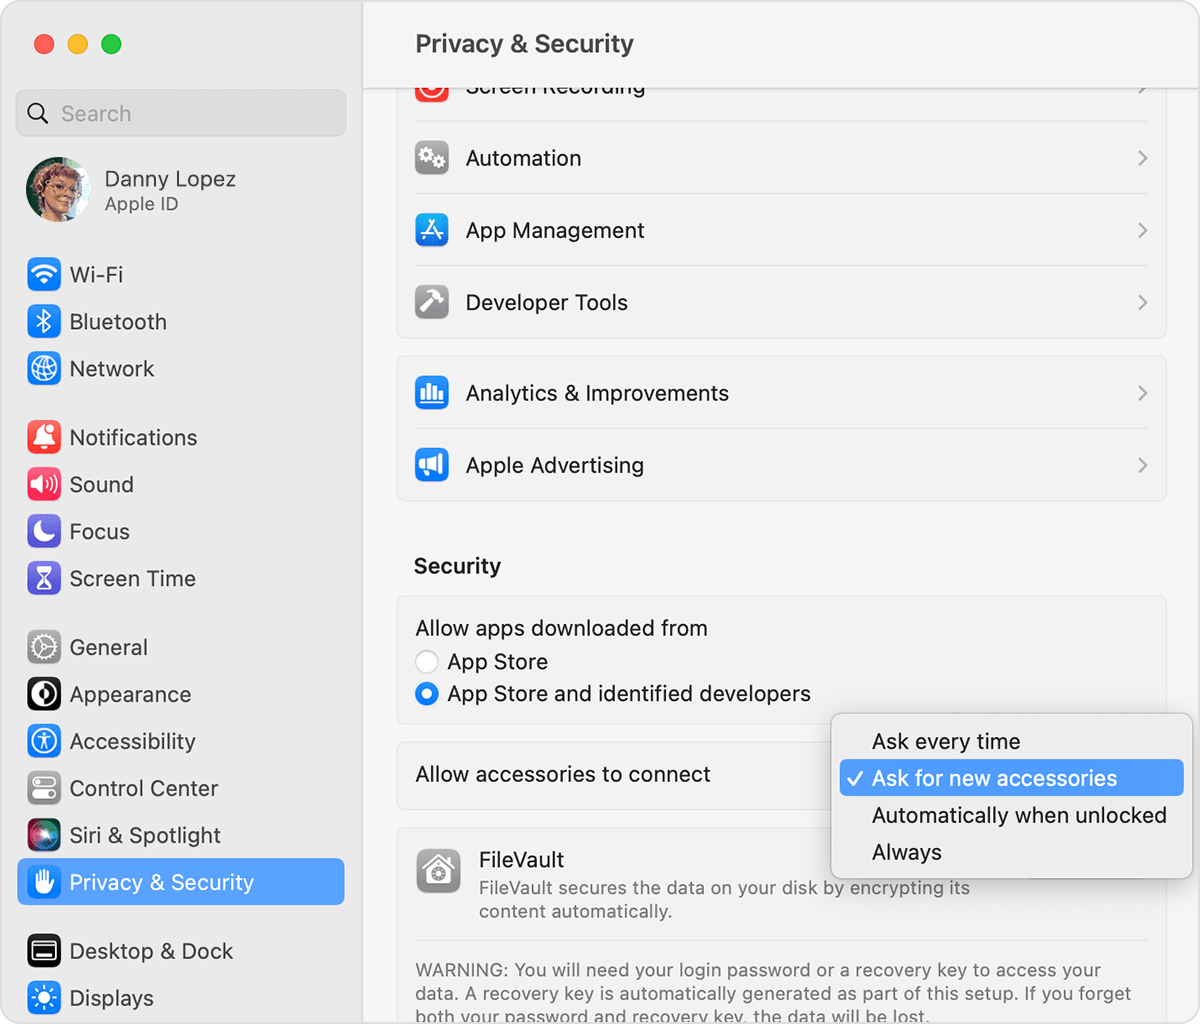 macos-ventura-system-settings-privacy-security-accessories.png